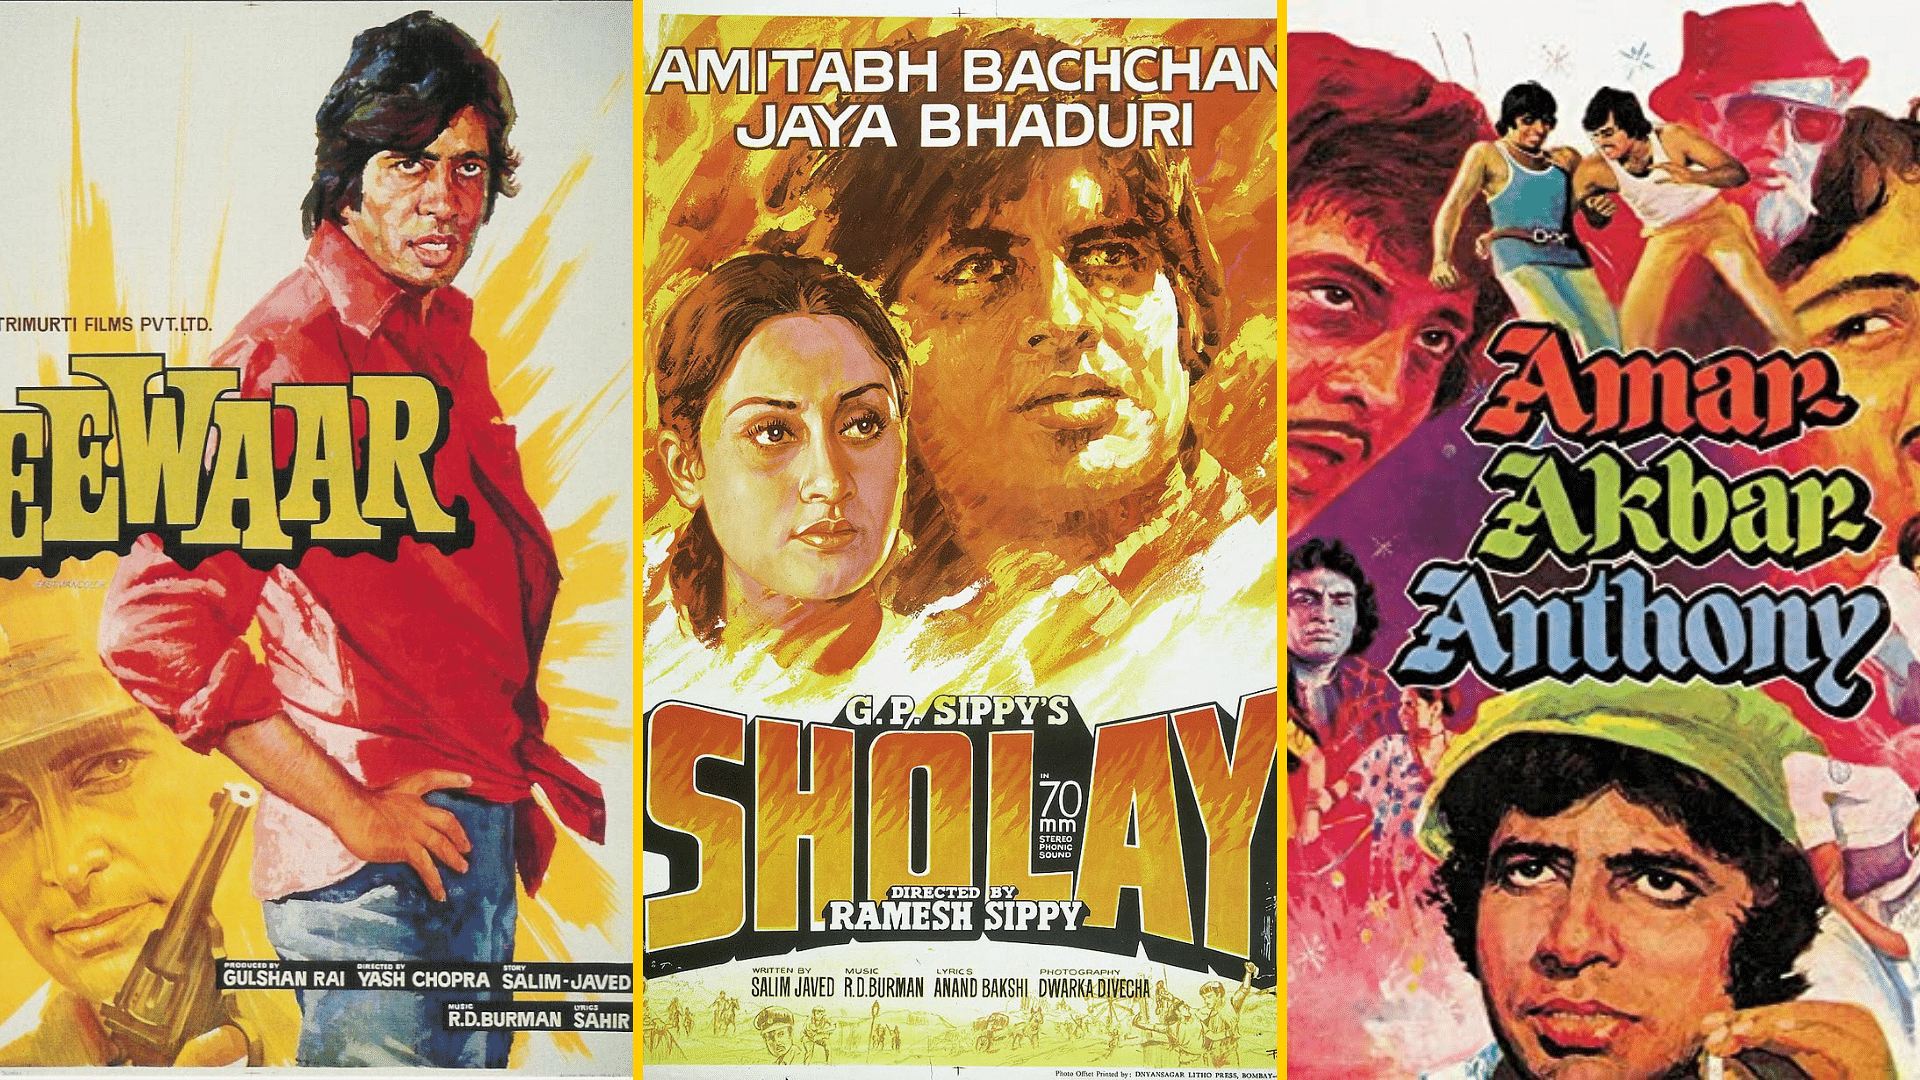 Diwakar Karkare created hand-painted posters for iconic Bollywood films such as <i>Sholay</i> and <i>Deewar</i>.